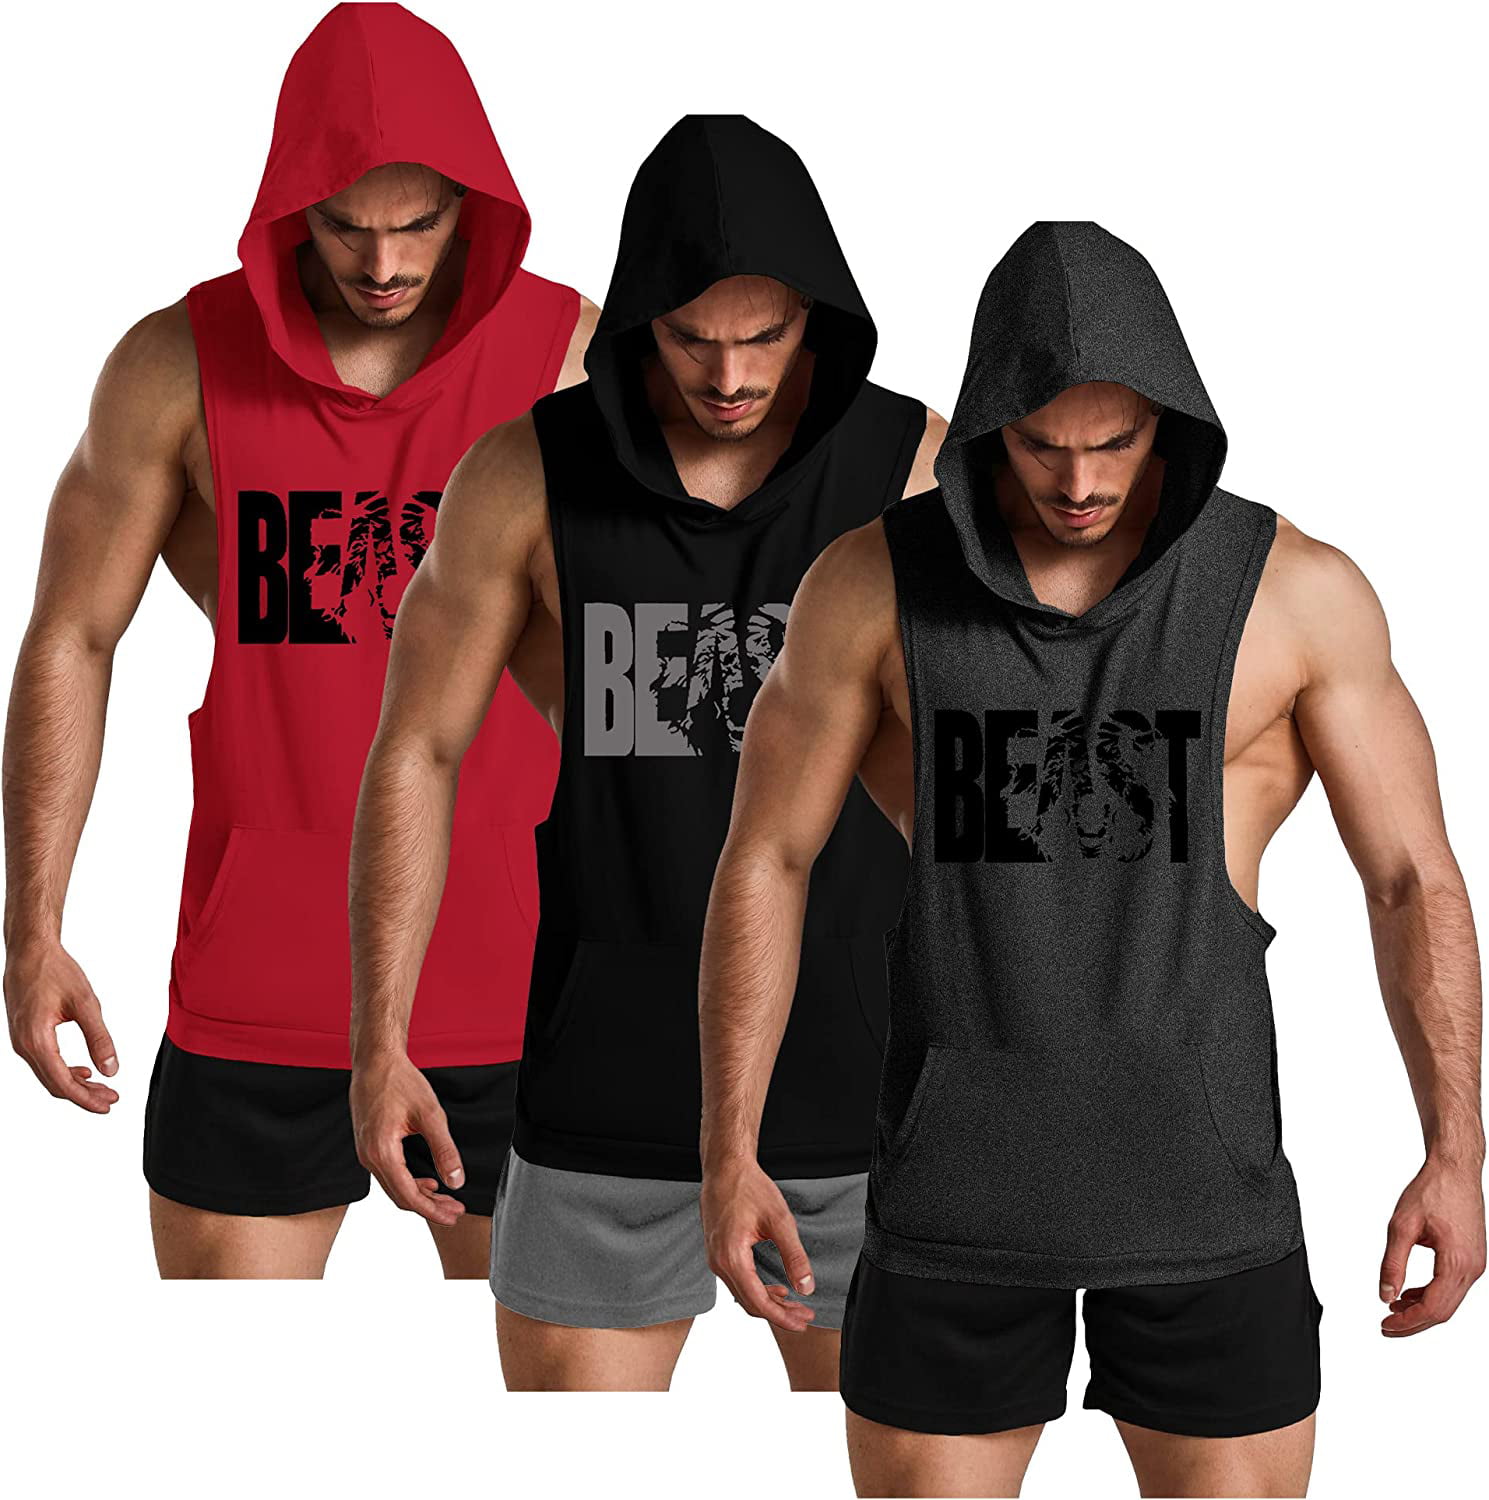 GYM REVOLUTION Men's Workout Sleeveless Shirts Muscle Hooded Tank Gym Fitness Quick Dry Sleeveless Hoodies 